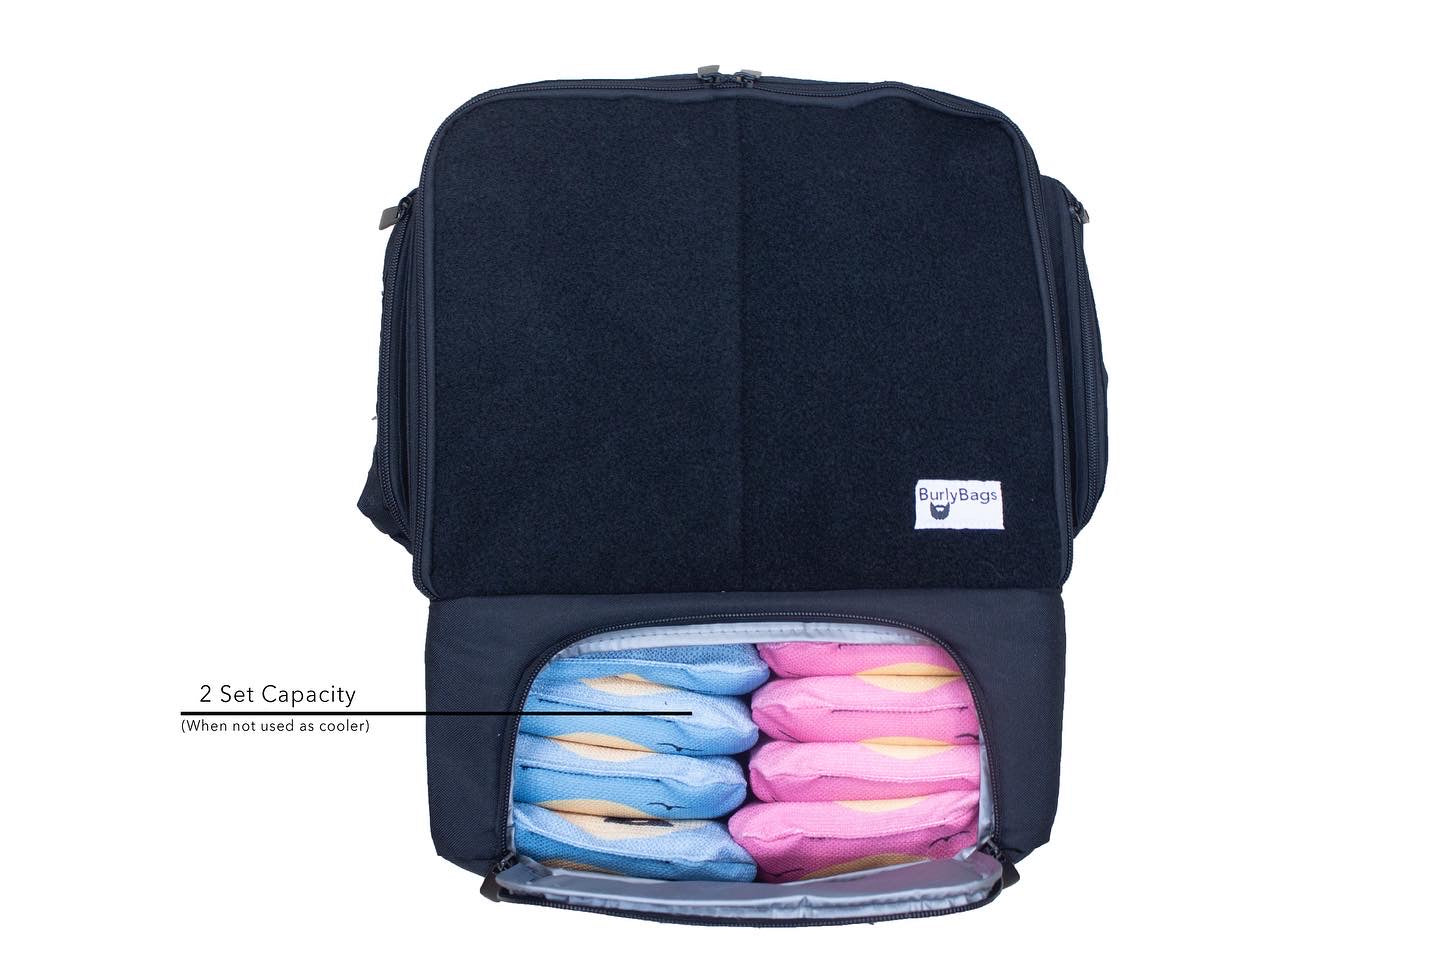 The "Burly Bag" Backpack with Cooler - Holds 5 sets bags and 10 cans